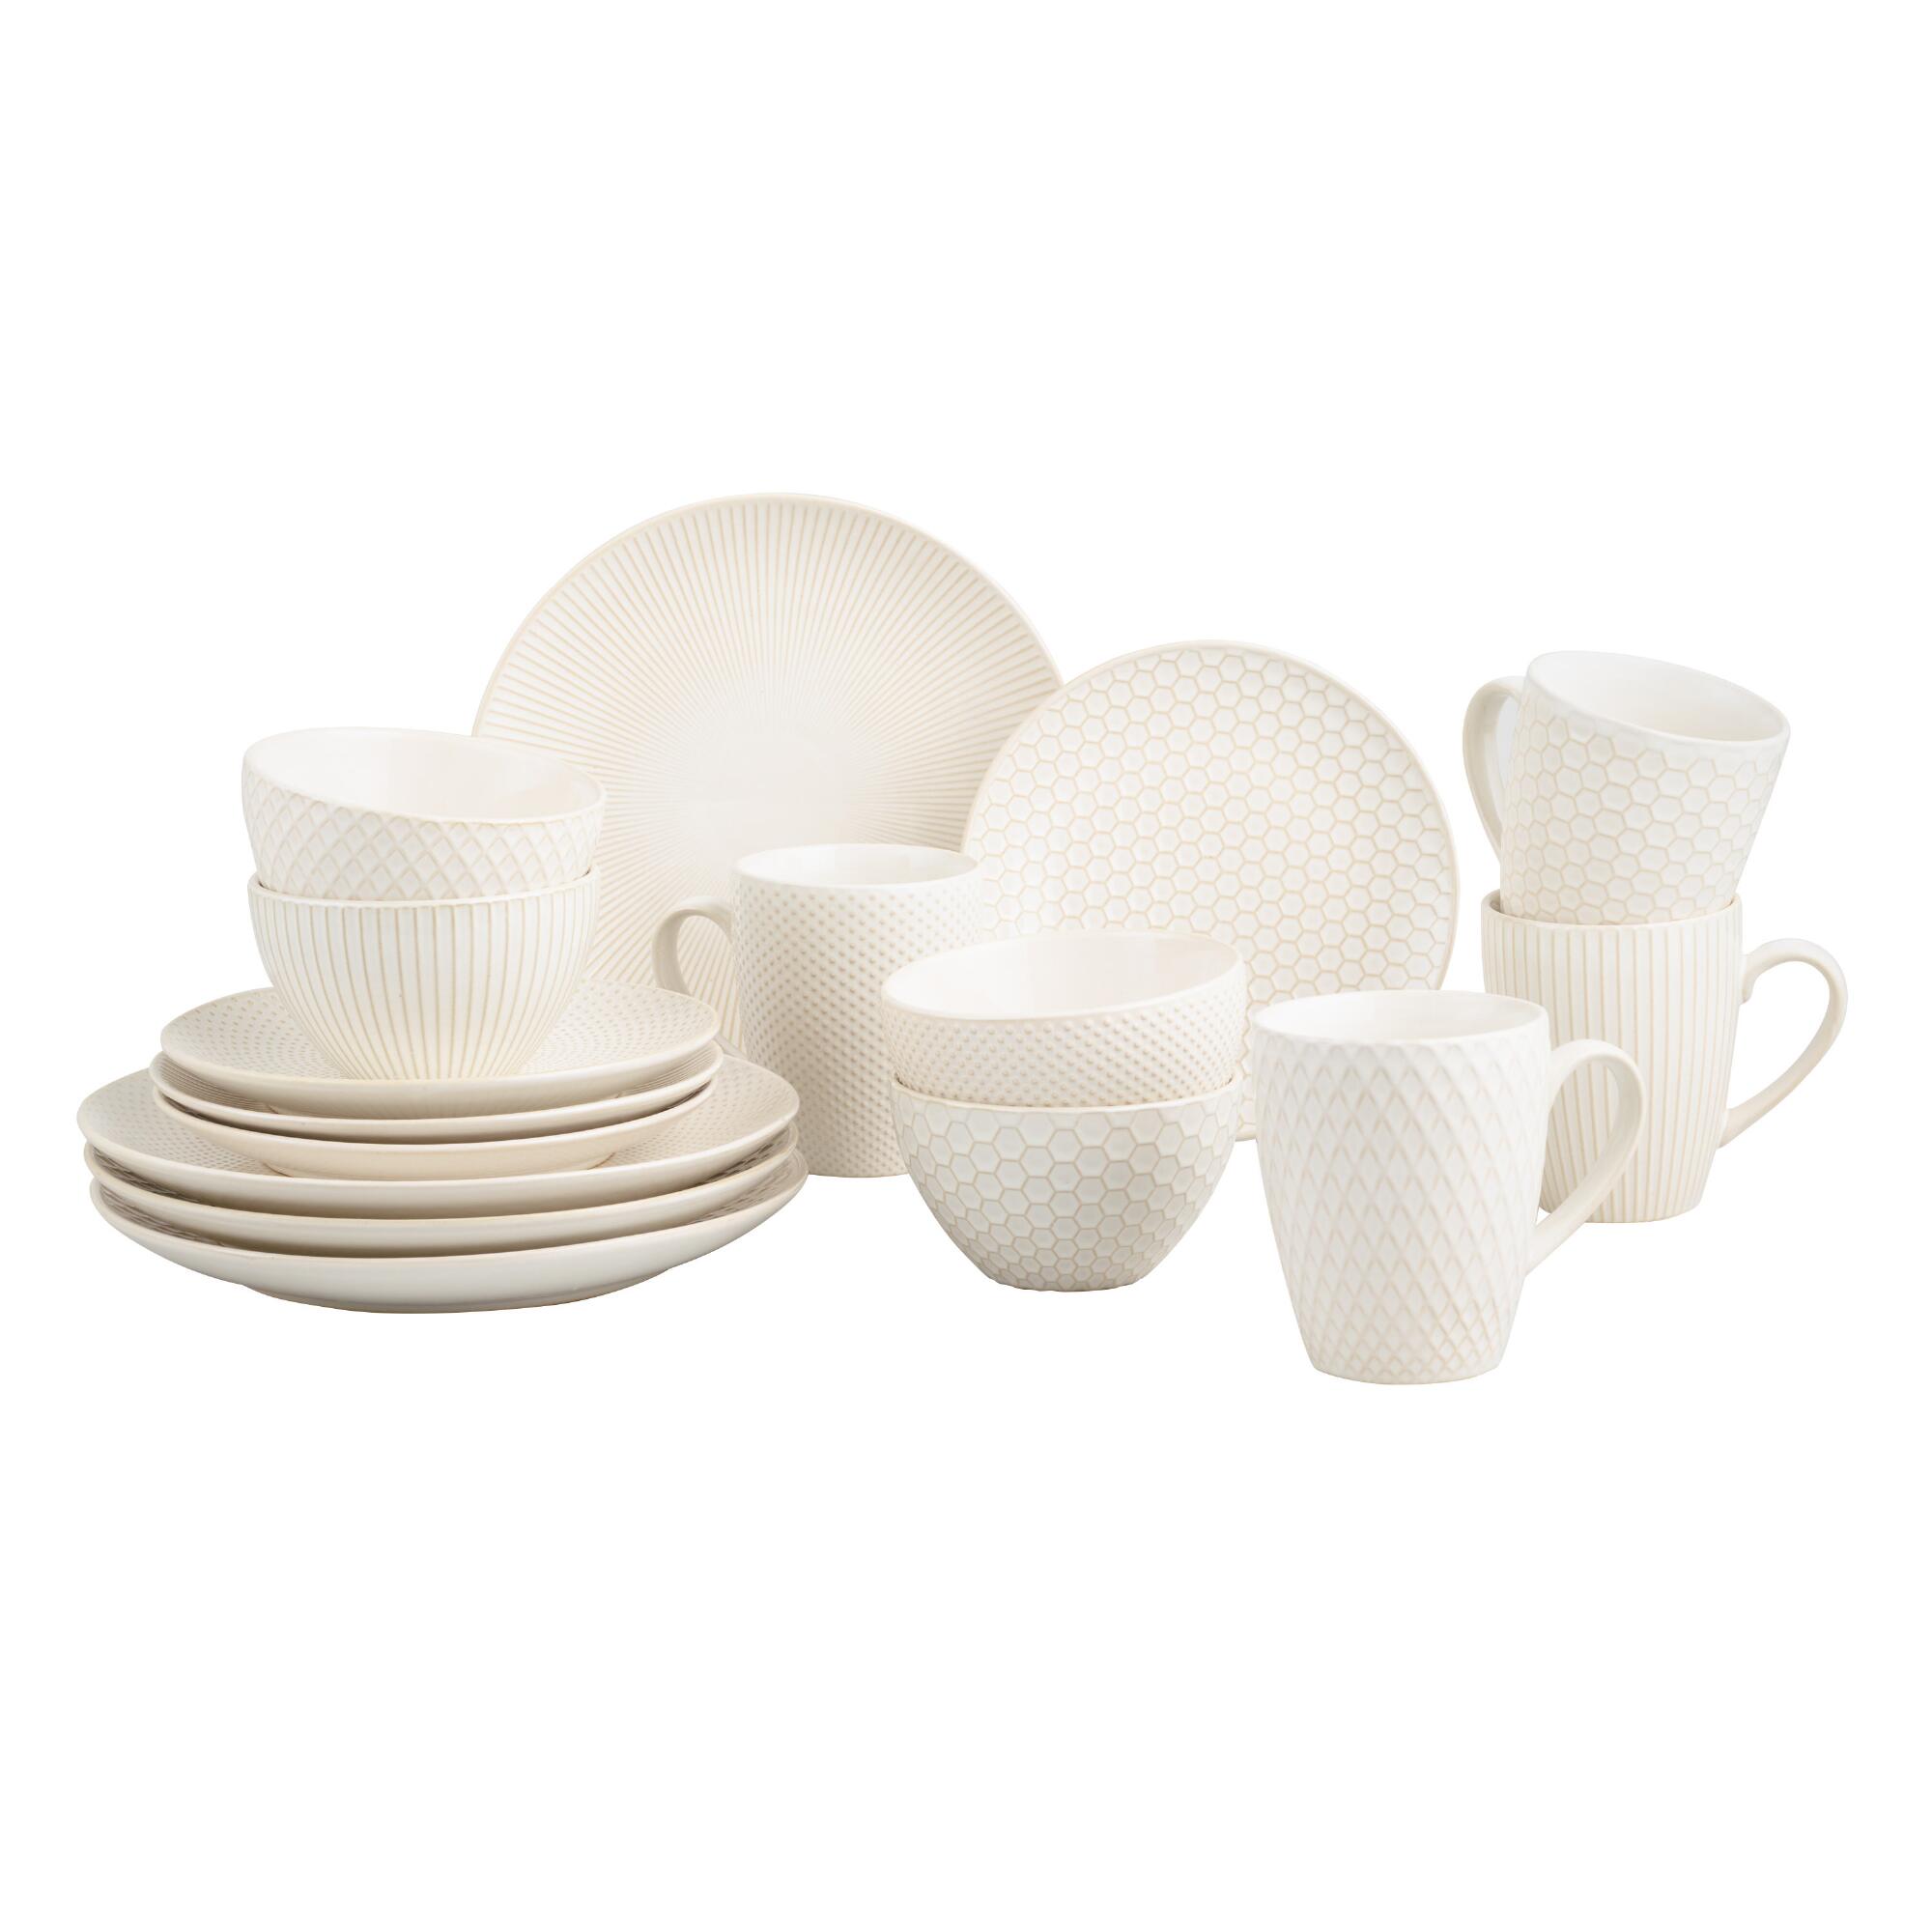 White Textured Ceramic Avery Dinnerware Collection by World Market